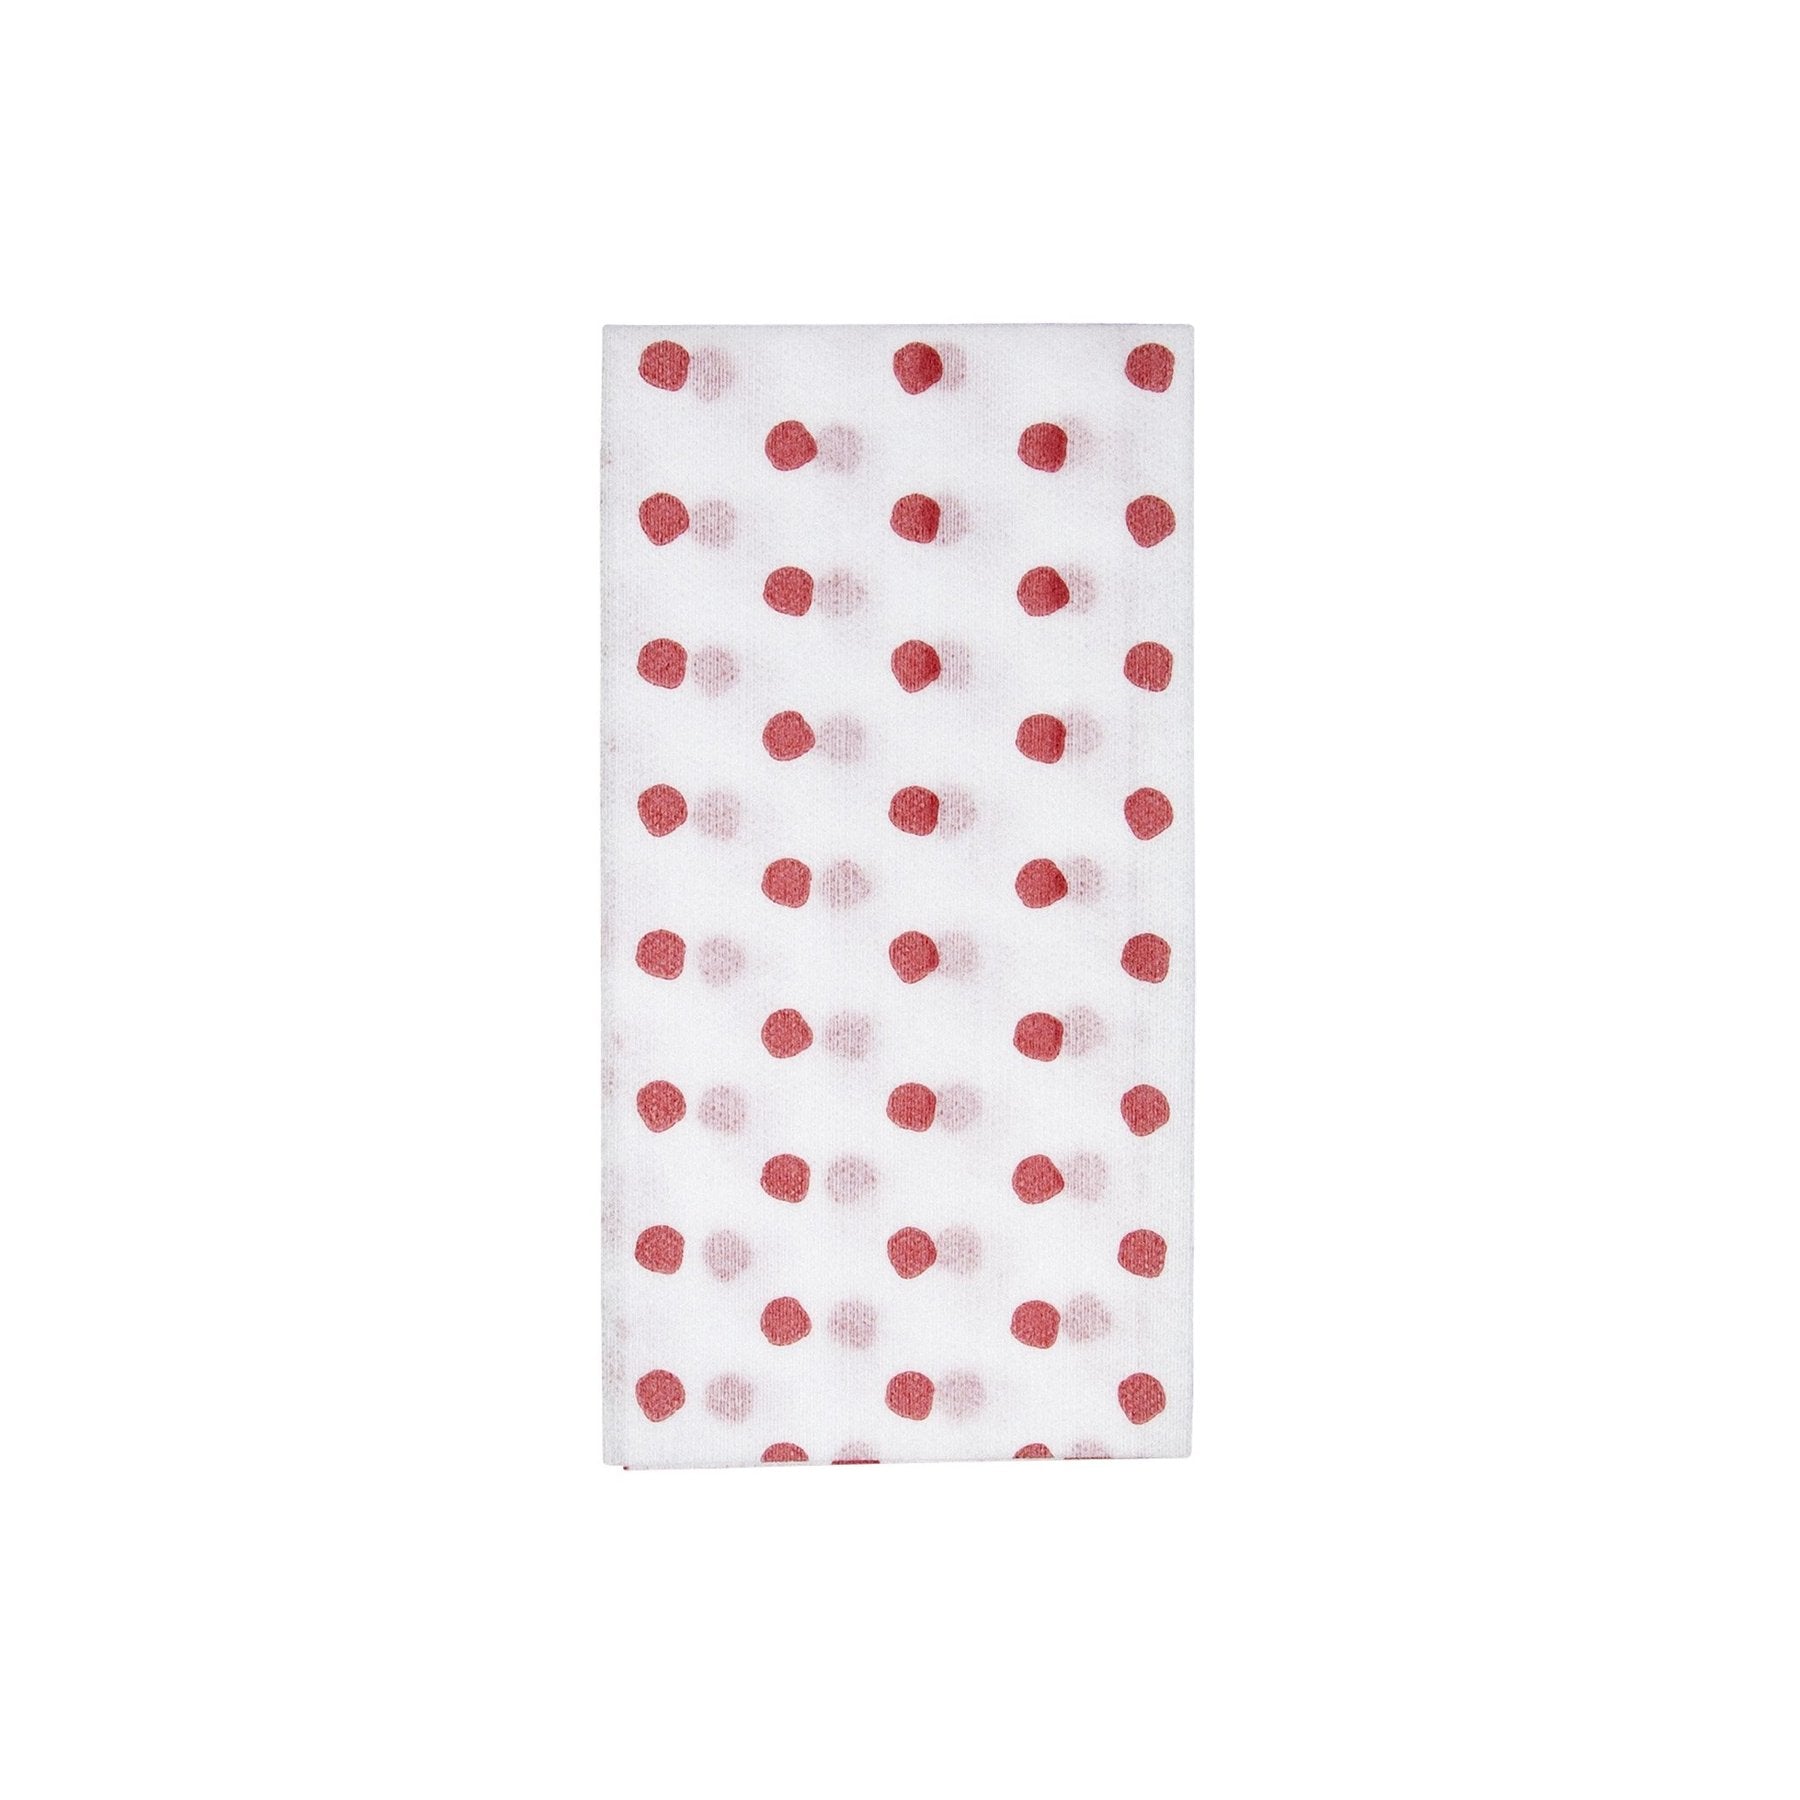 Papersoft Napkins Red Dot Guest Towel - Pack of 50